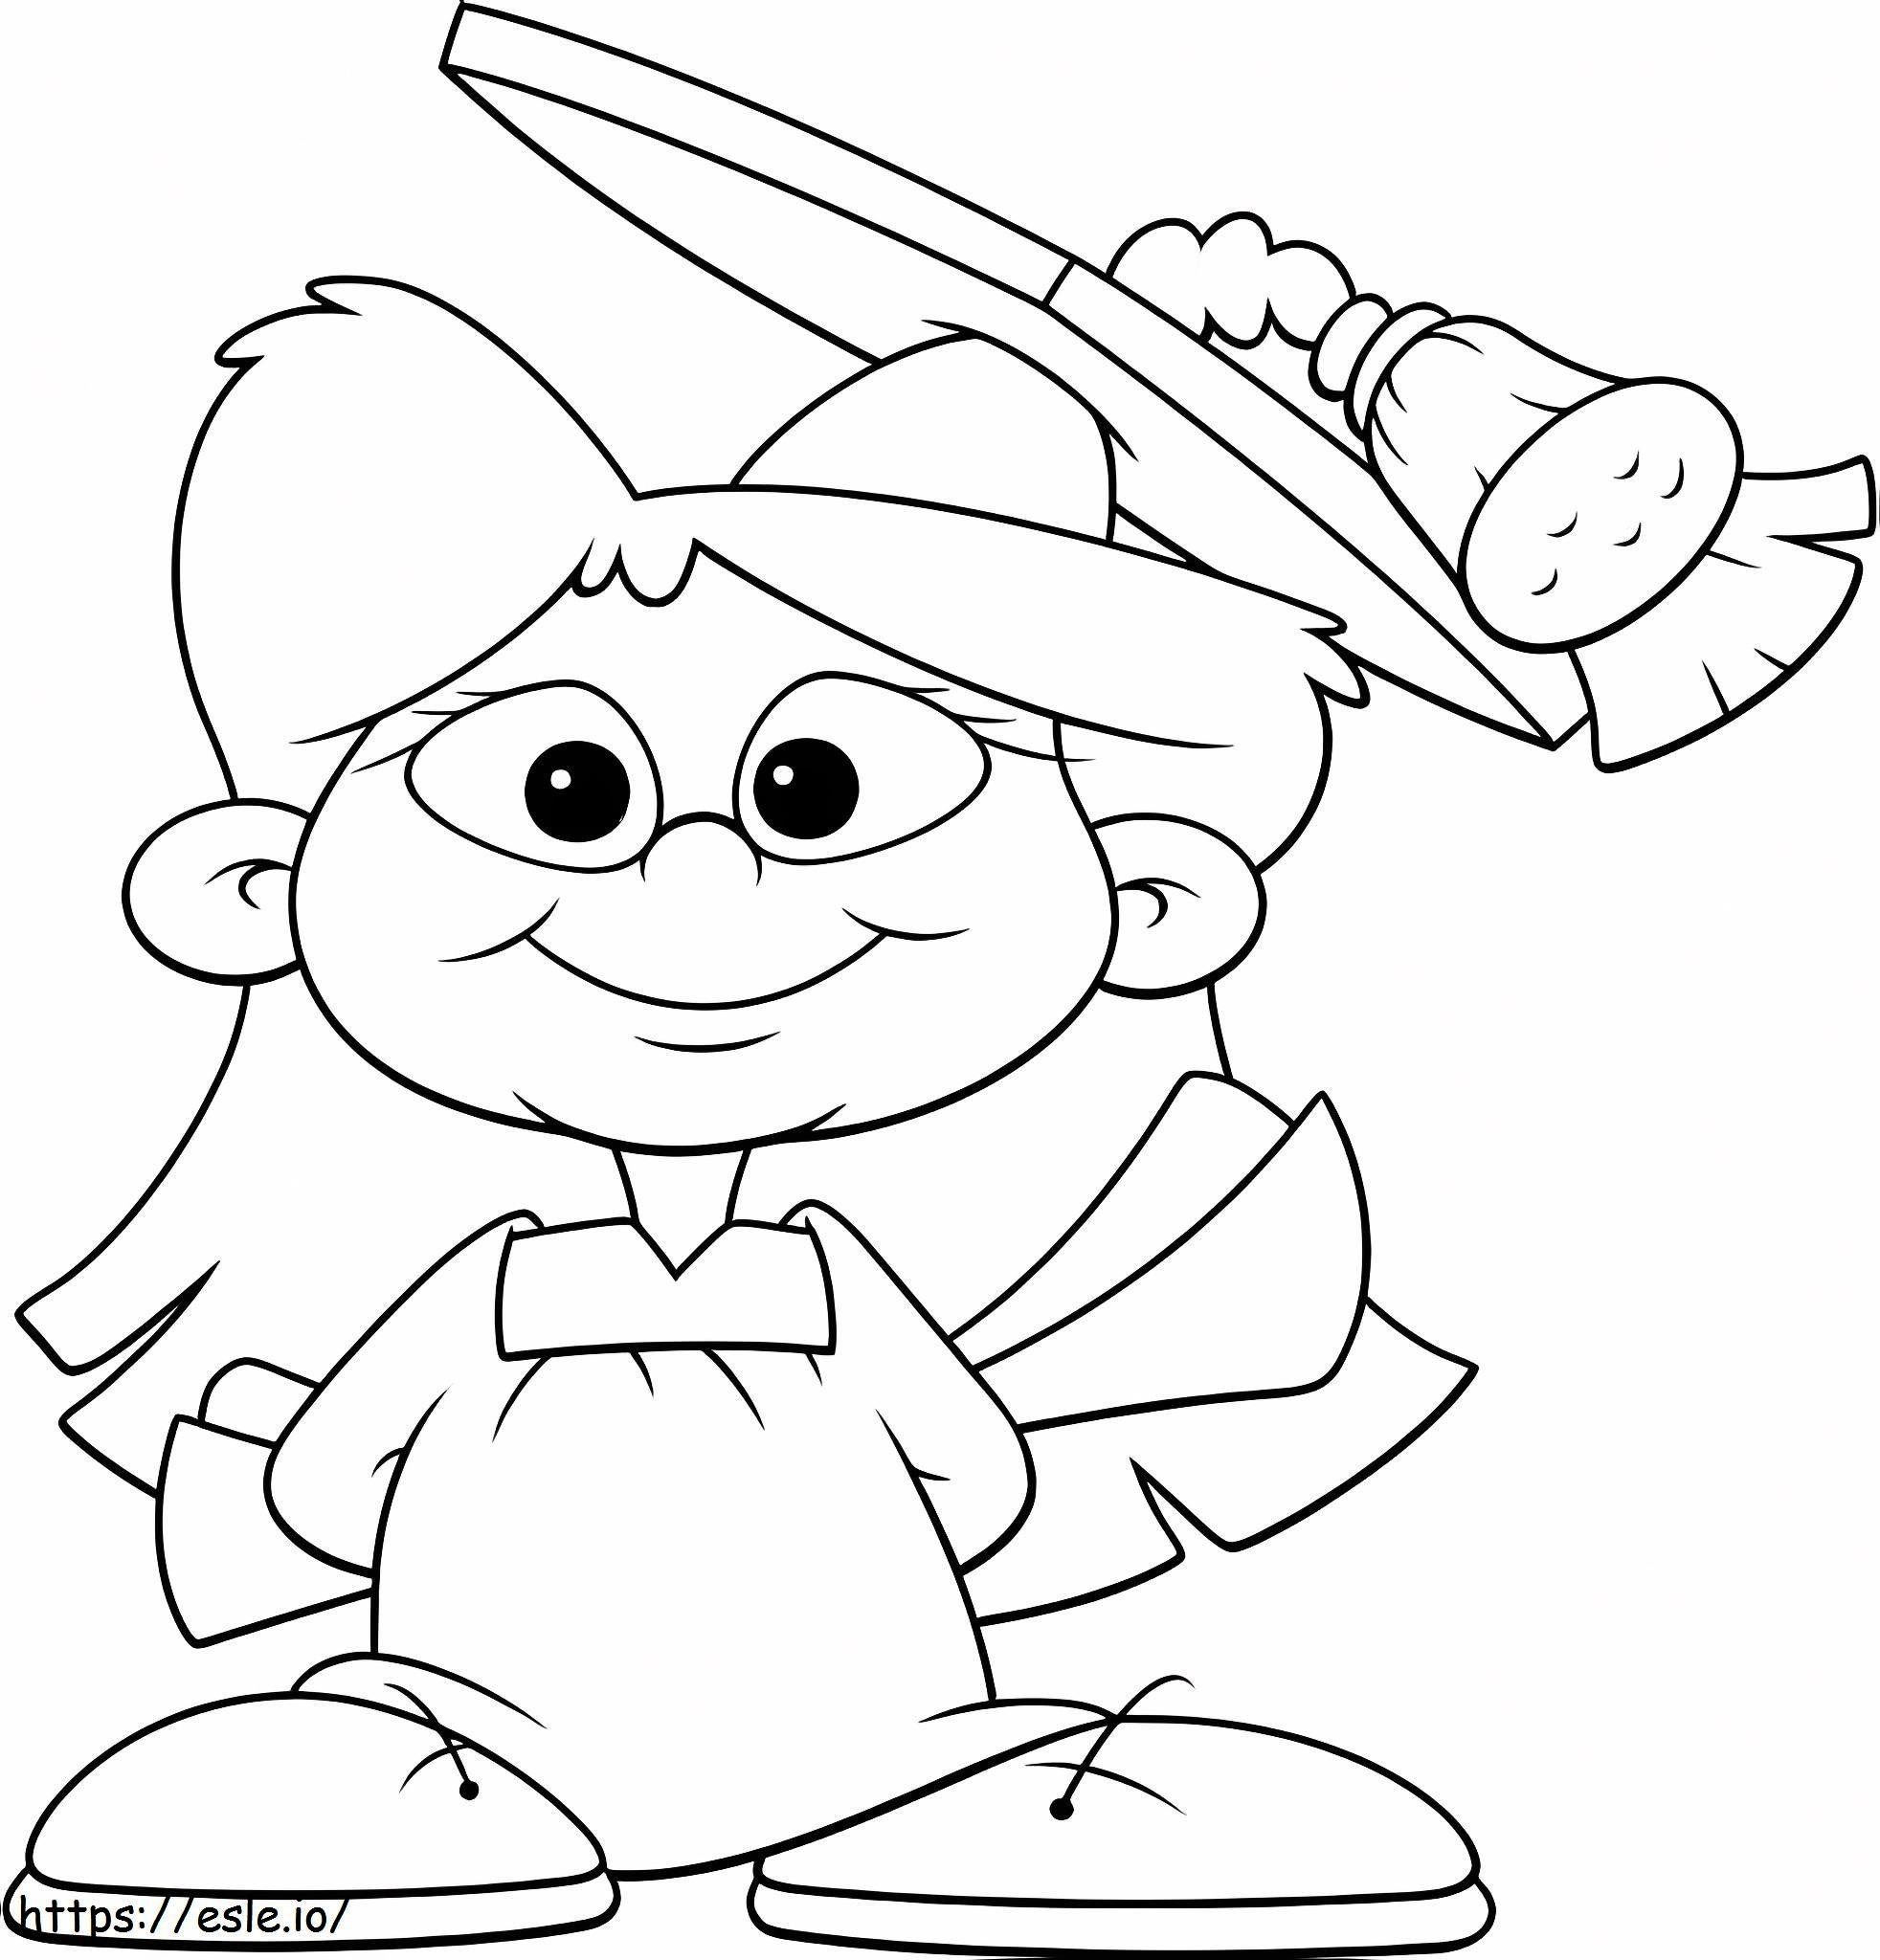 Girl Graduate coloring page